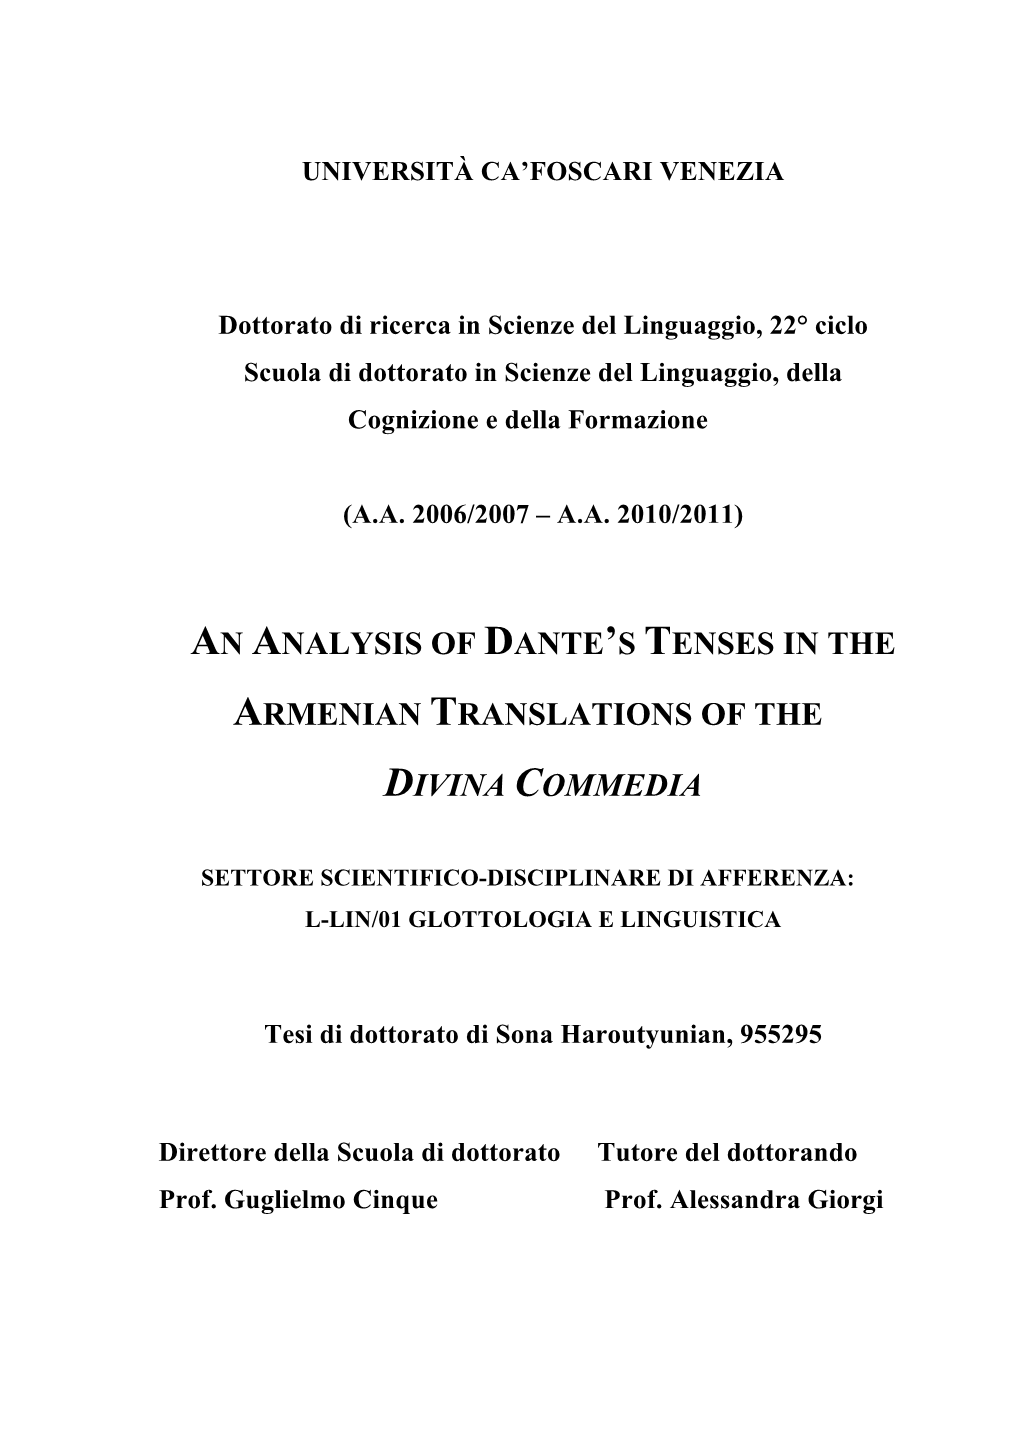 An Analysis of Dante's Tenses in the Armenian